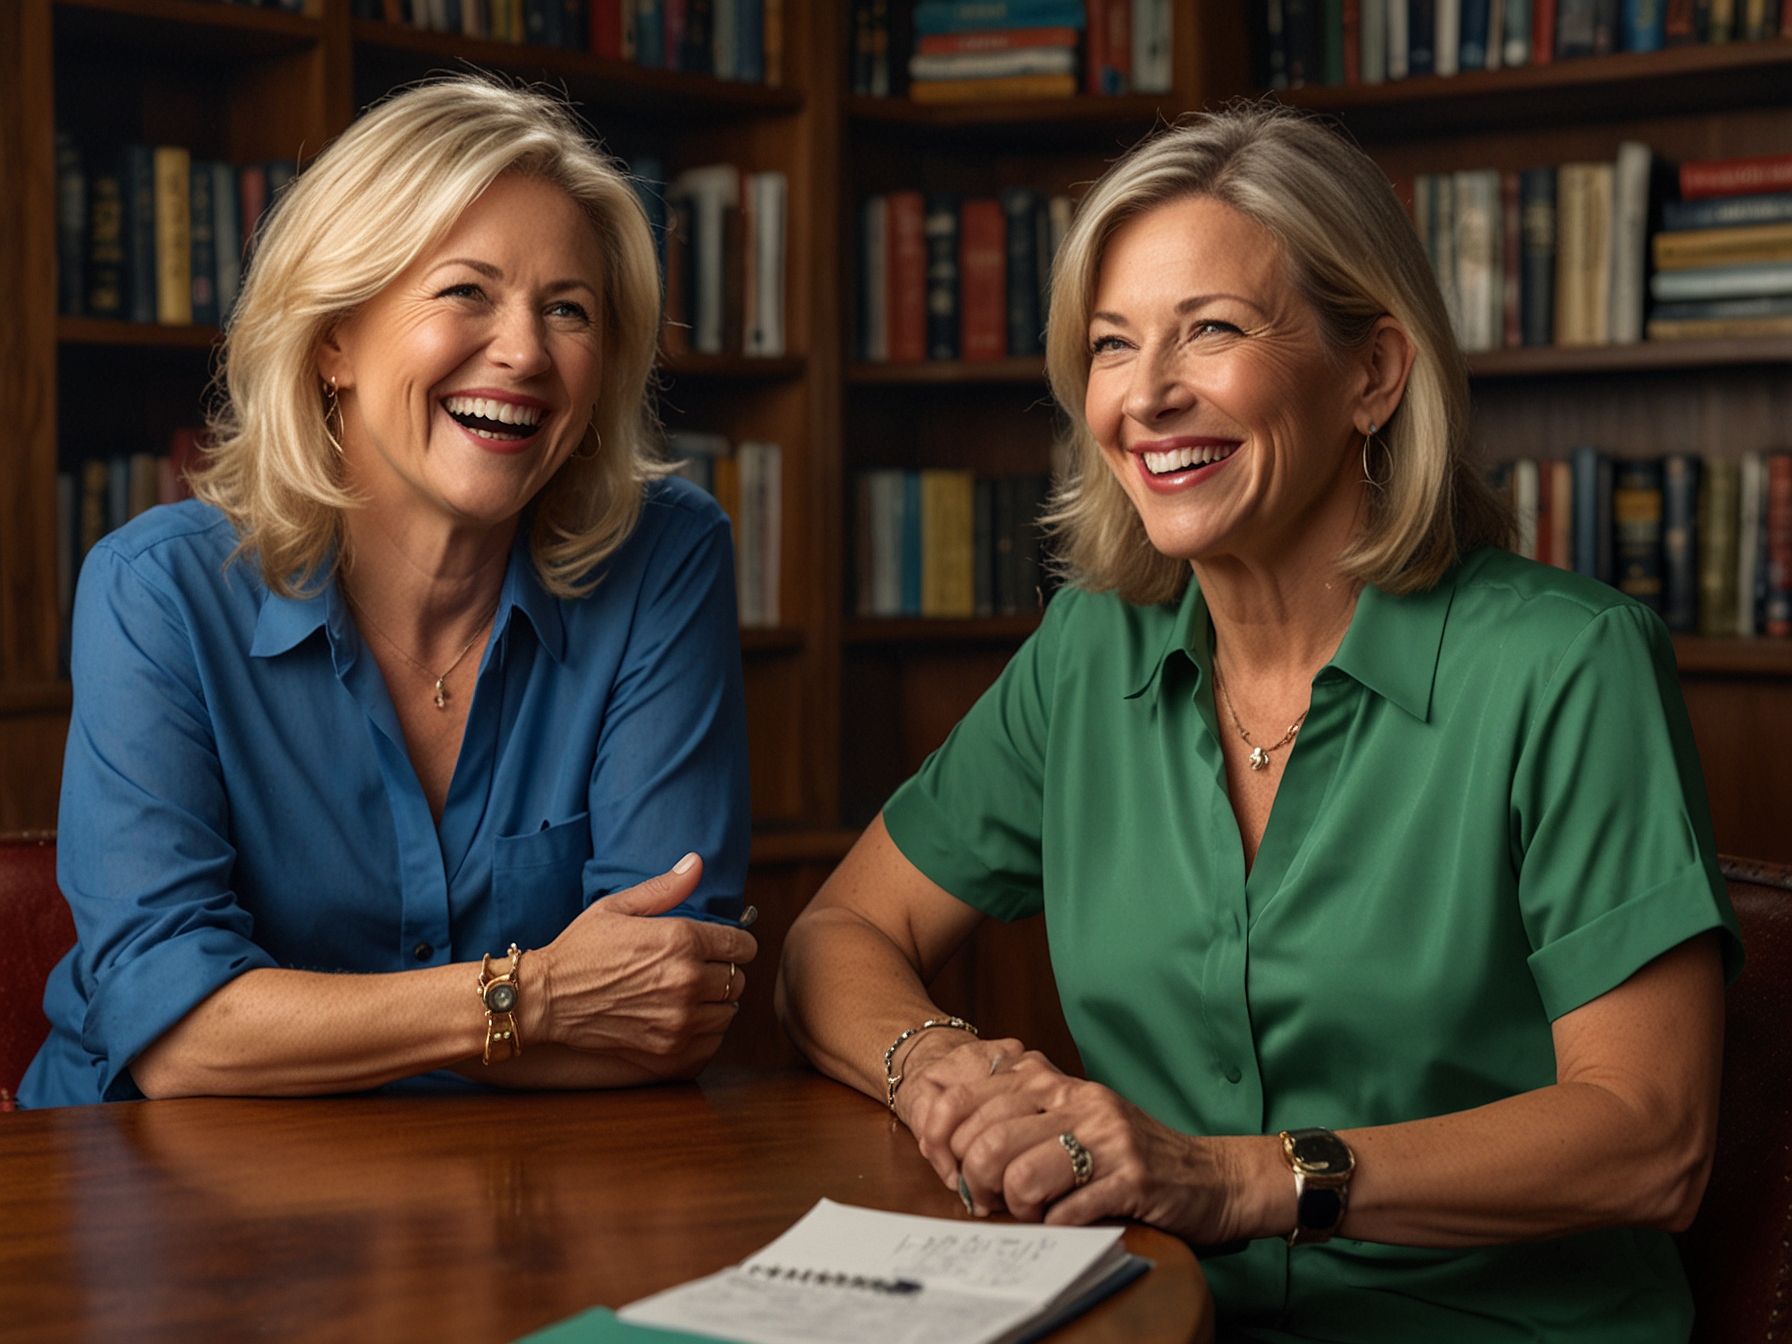 Susan Noles and Kathy Swarts share a laugh on their podcast, 'Bachelor Happy Hour: Golden Hour,' as they discuss their dating lives and preferences, bringing humor and candor to their listeners.